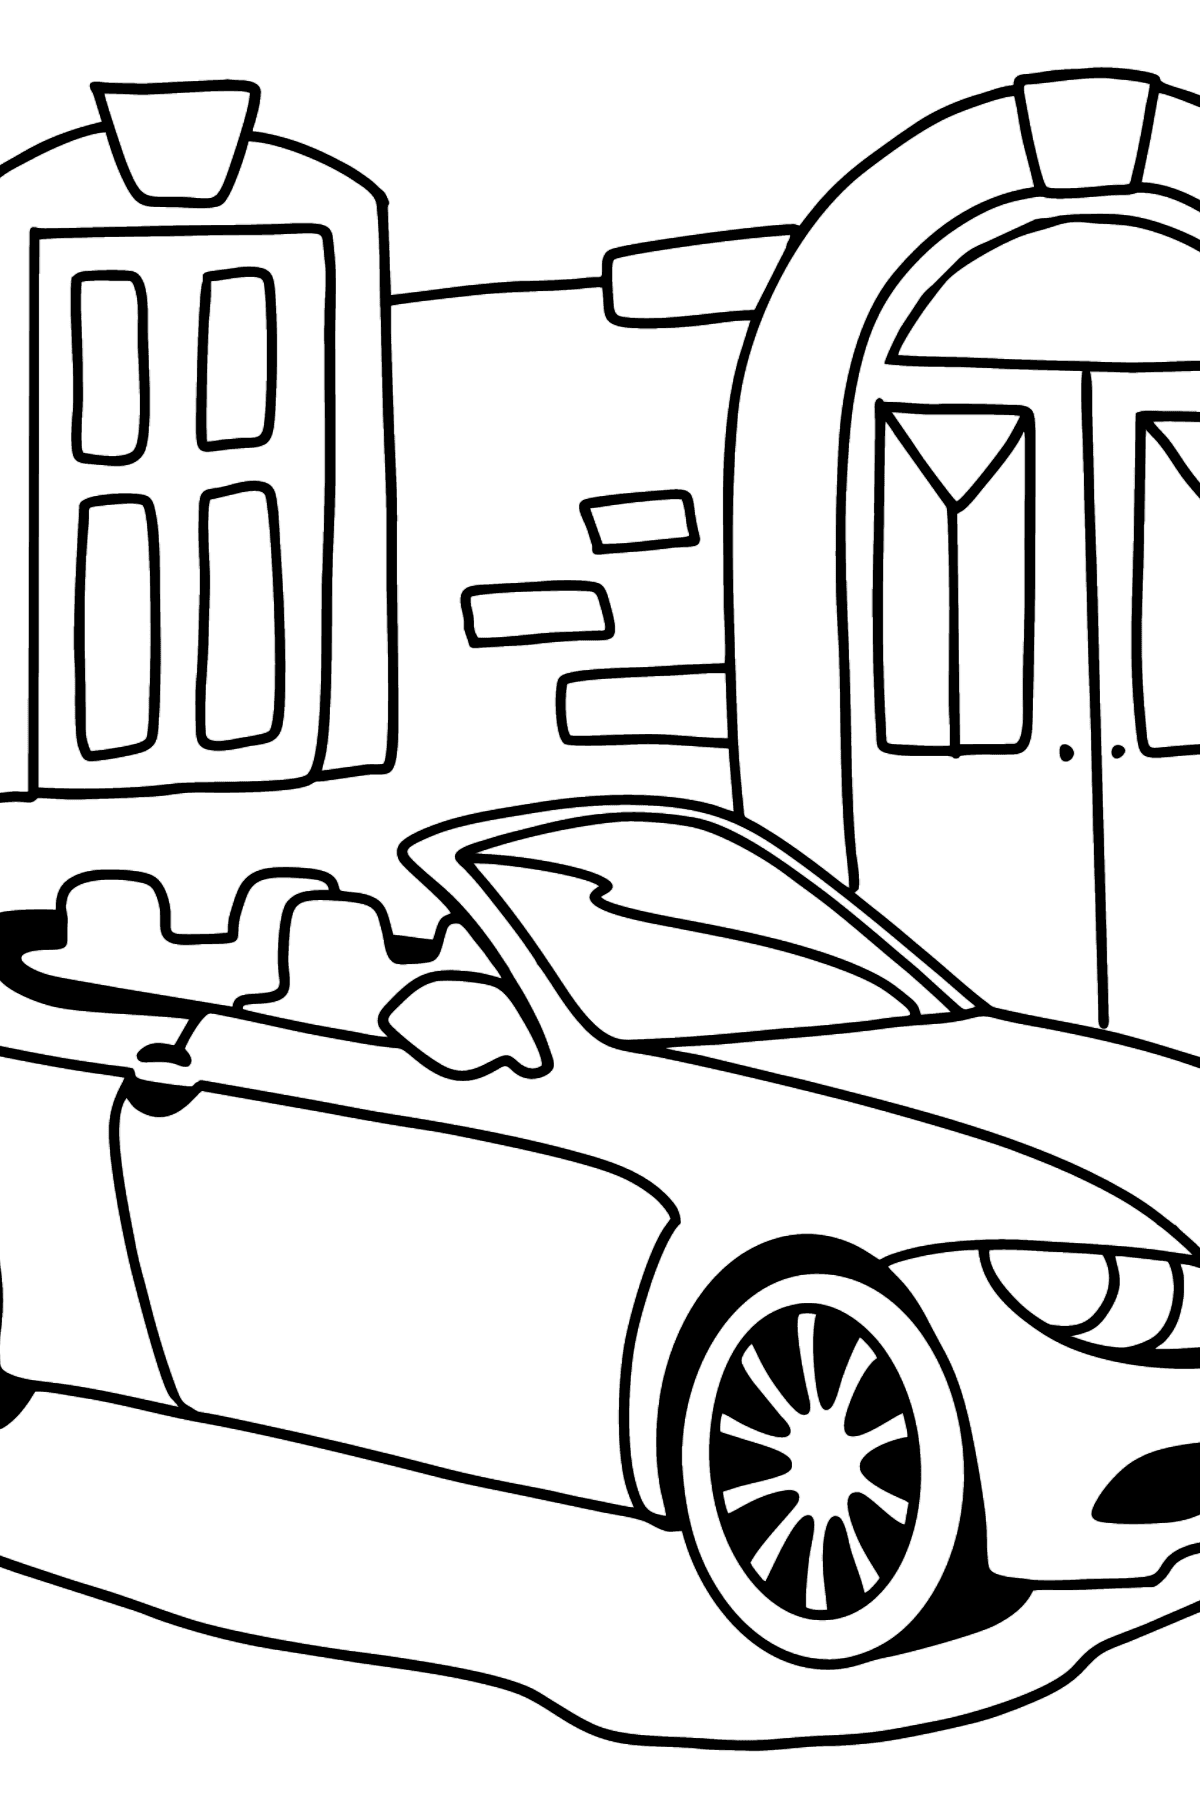 BMW Convertible coloring page - Coloring Pages for Kids